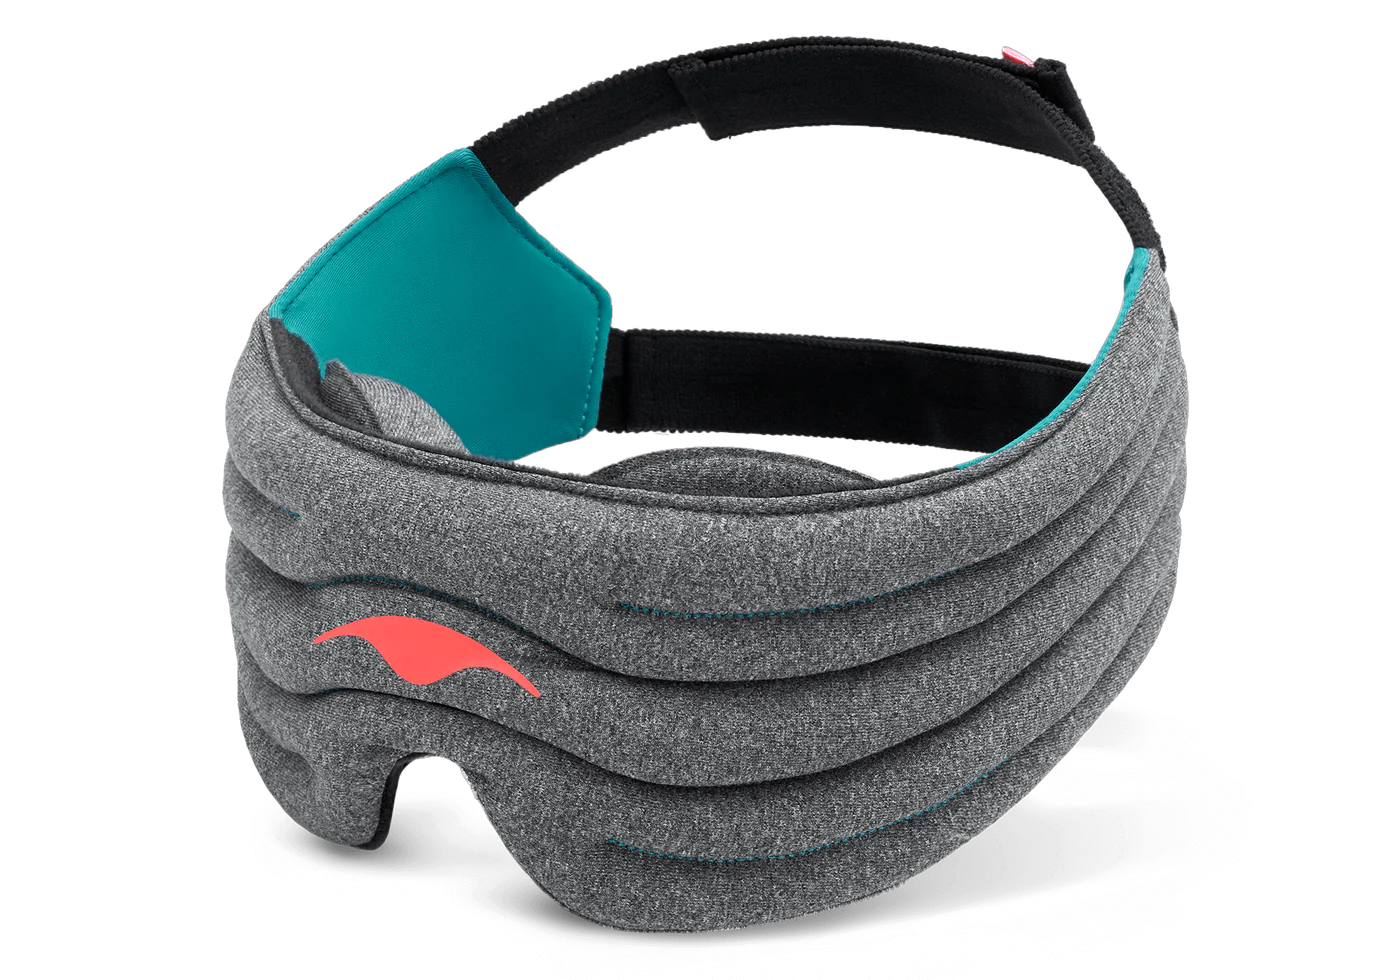 A gray weighted sleep mask with eye cups and green details.